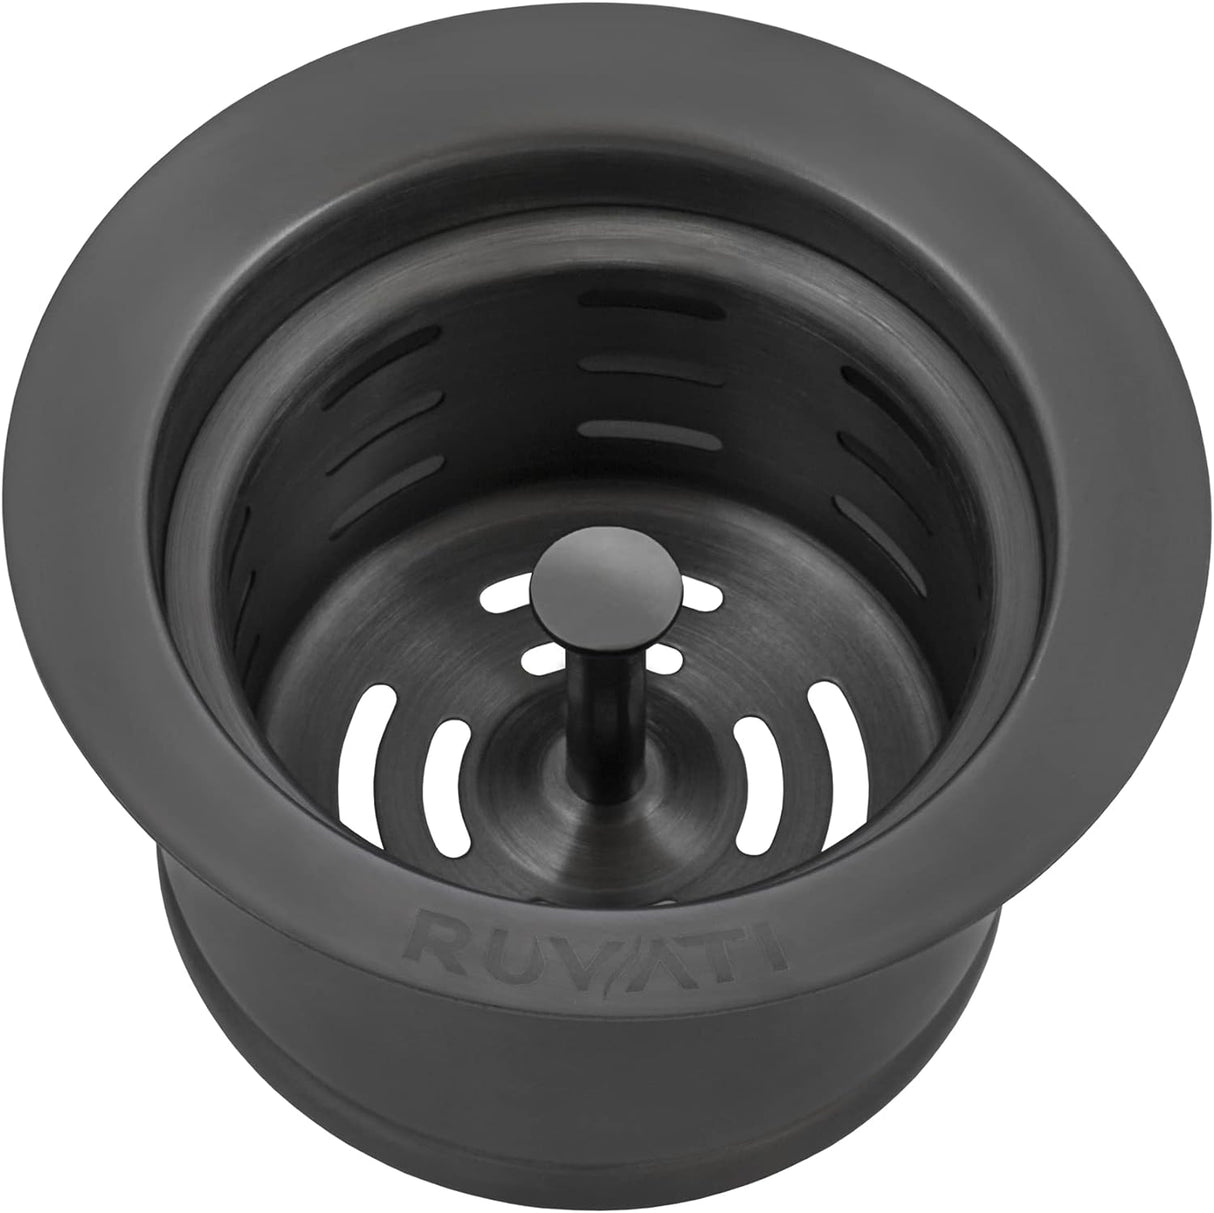 Ruvati Extended Garbage Disposal Flange with Deep Basket Strainer for Kitchen Sinks – Stainless Steel – RVA1049ST